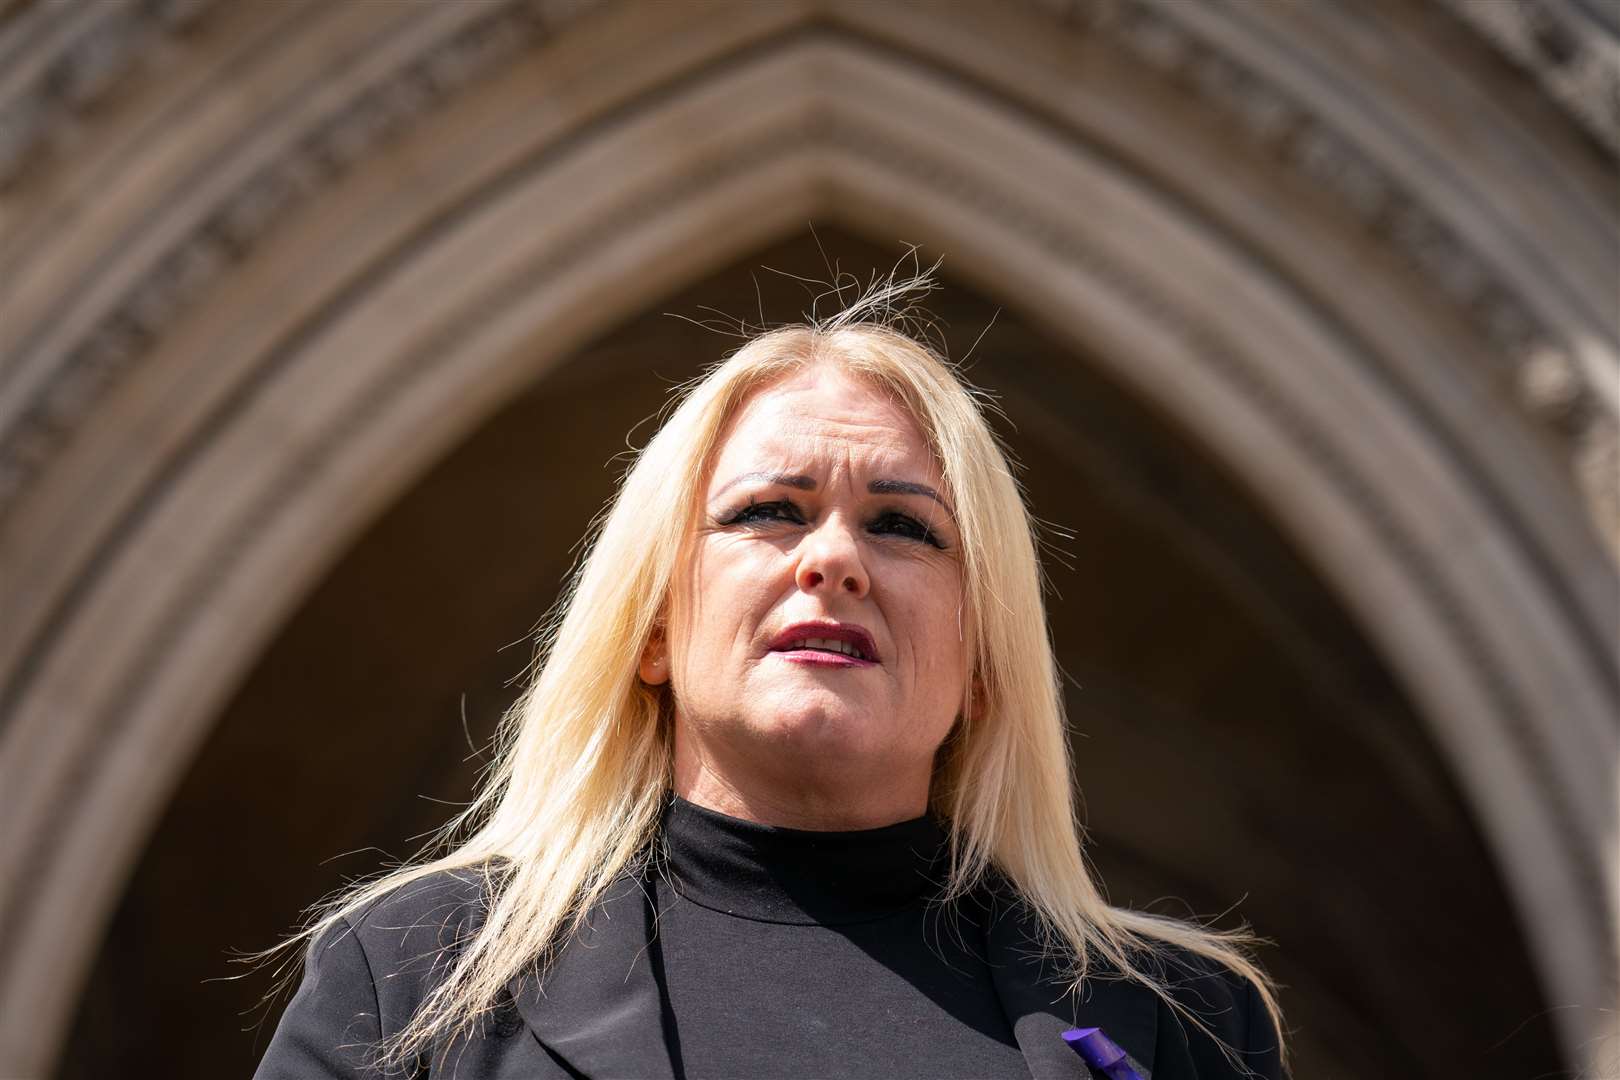 Hollie Dance speaks to the media outside the Royal Courts of Justice (Dominic Lipinski/PA)